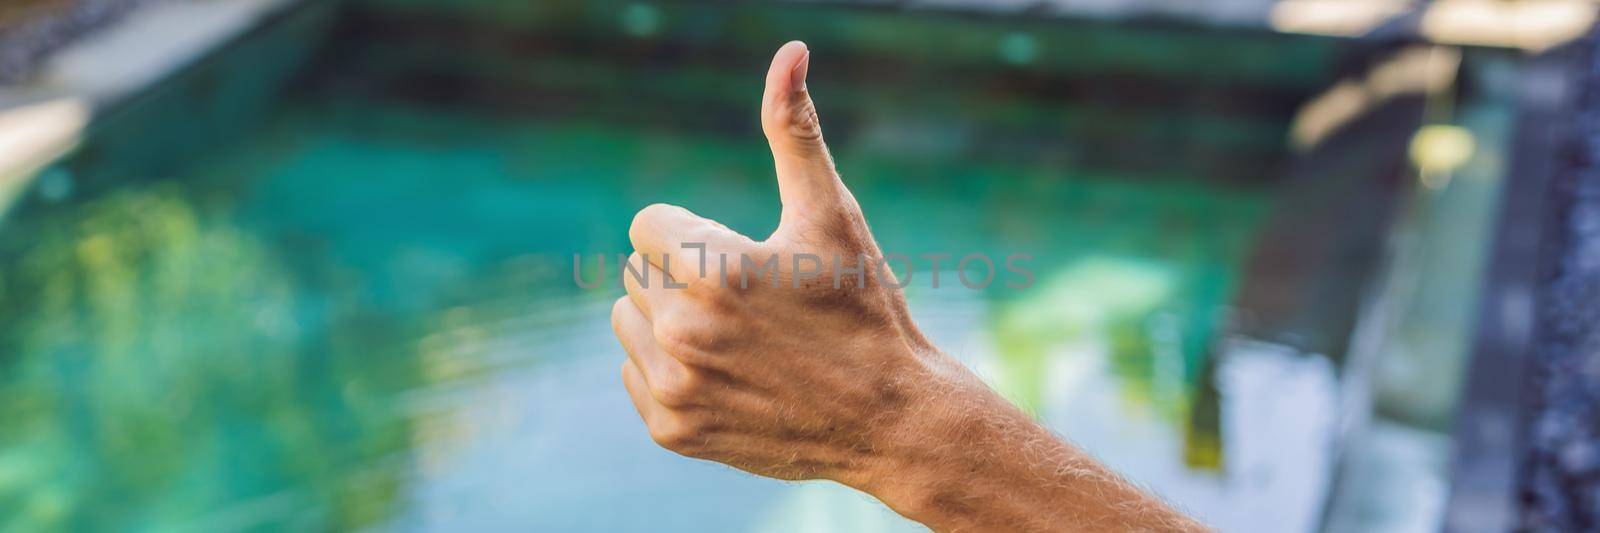 Hand shows like. Pool quality, pool cleaning BANNER, LONG FORMAT by galitskaya